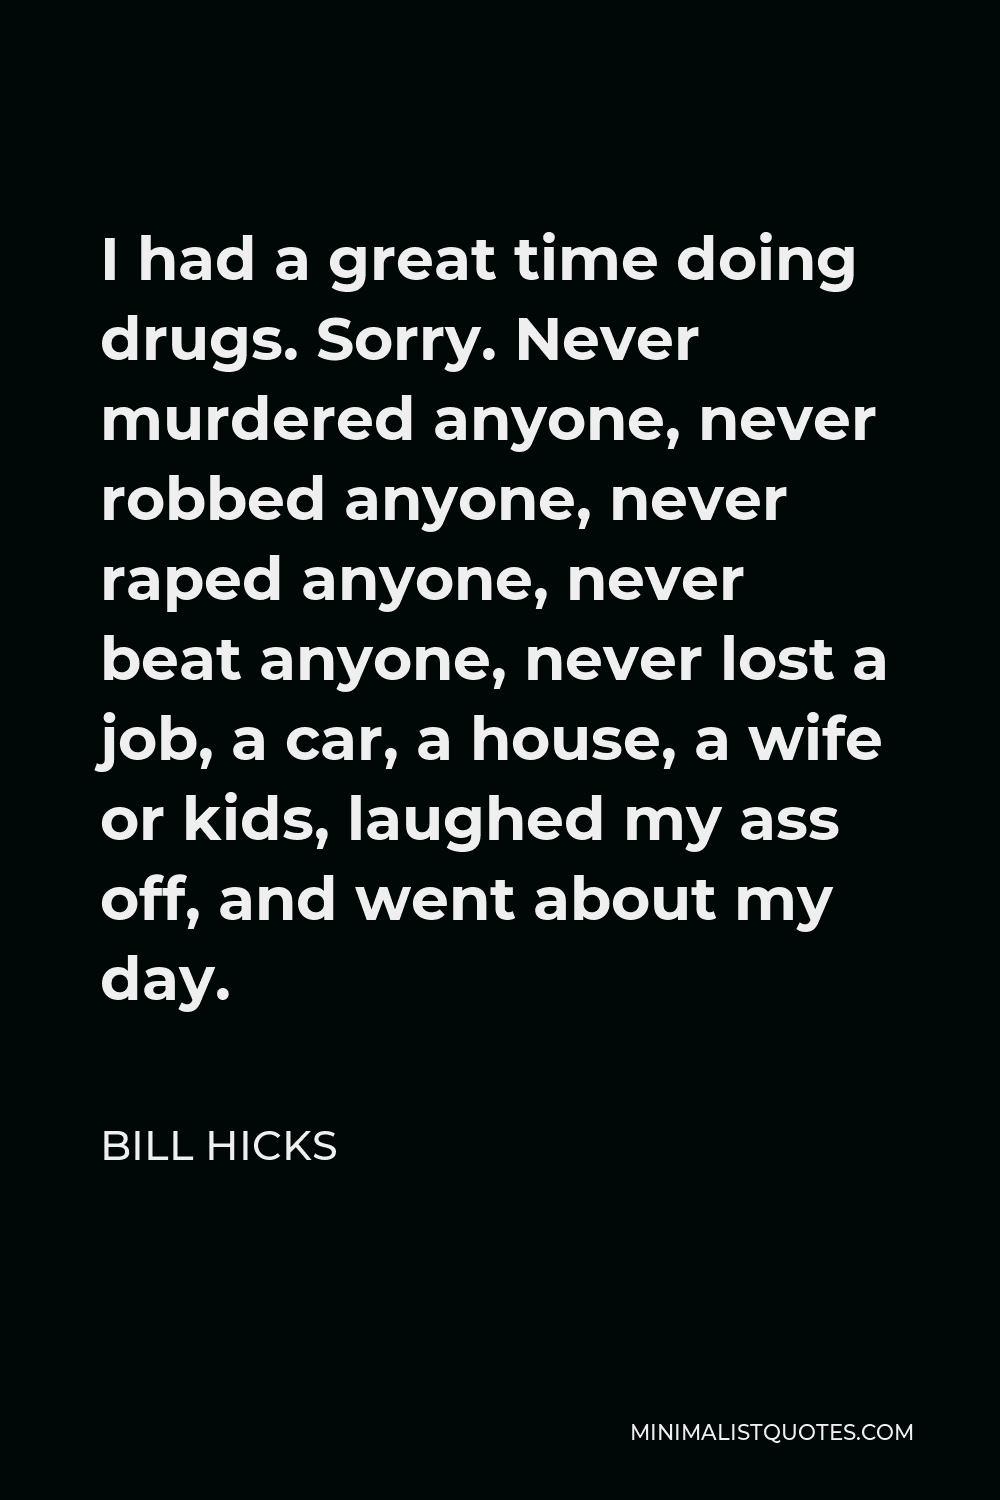 Bill Hicks Quote - I had a great time doing drugs. Sorry. Never murdered anyone, never robbed anyone, never raped anyone, never beat anyone, never lost a job, a car, a house, a wife or kids, laughed my ass off, and went about my day.